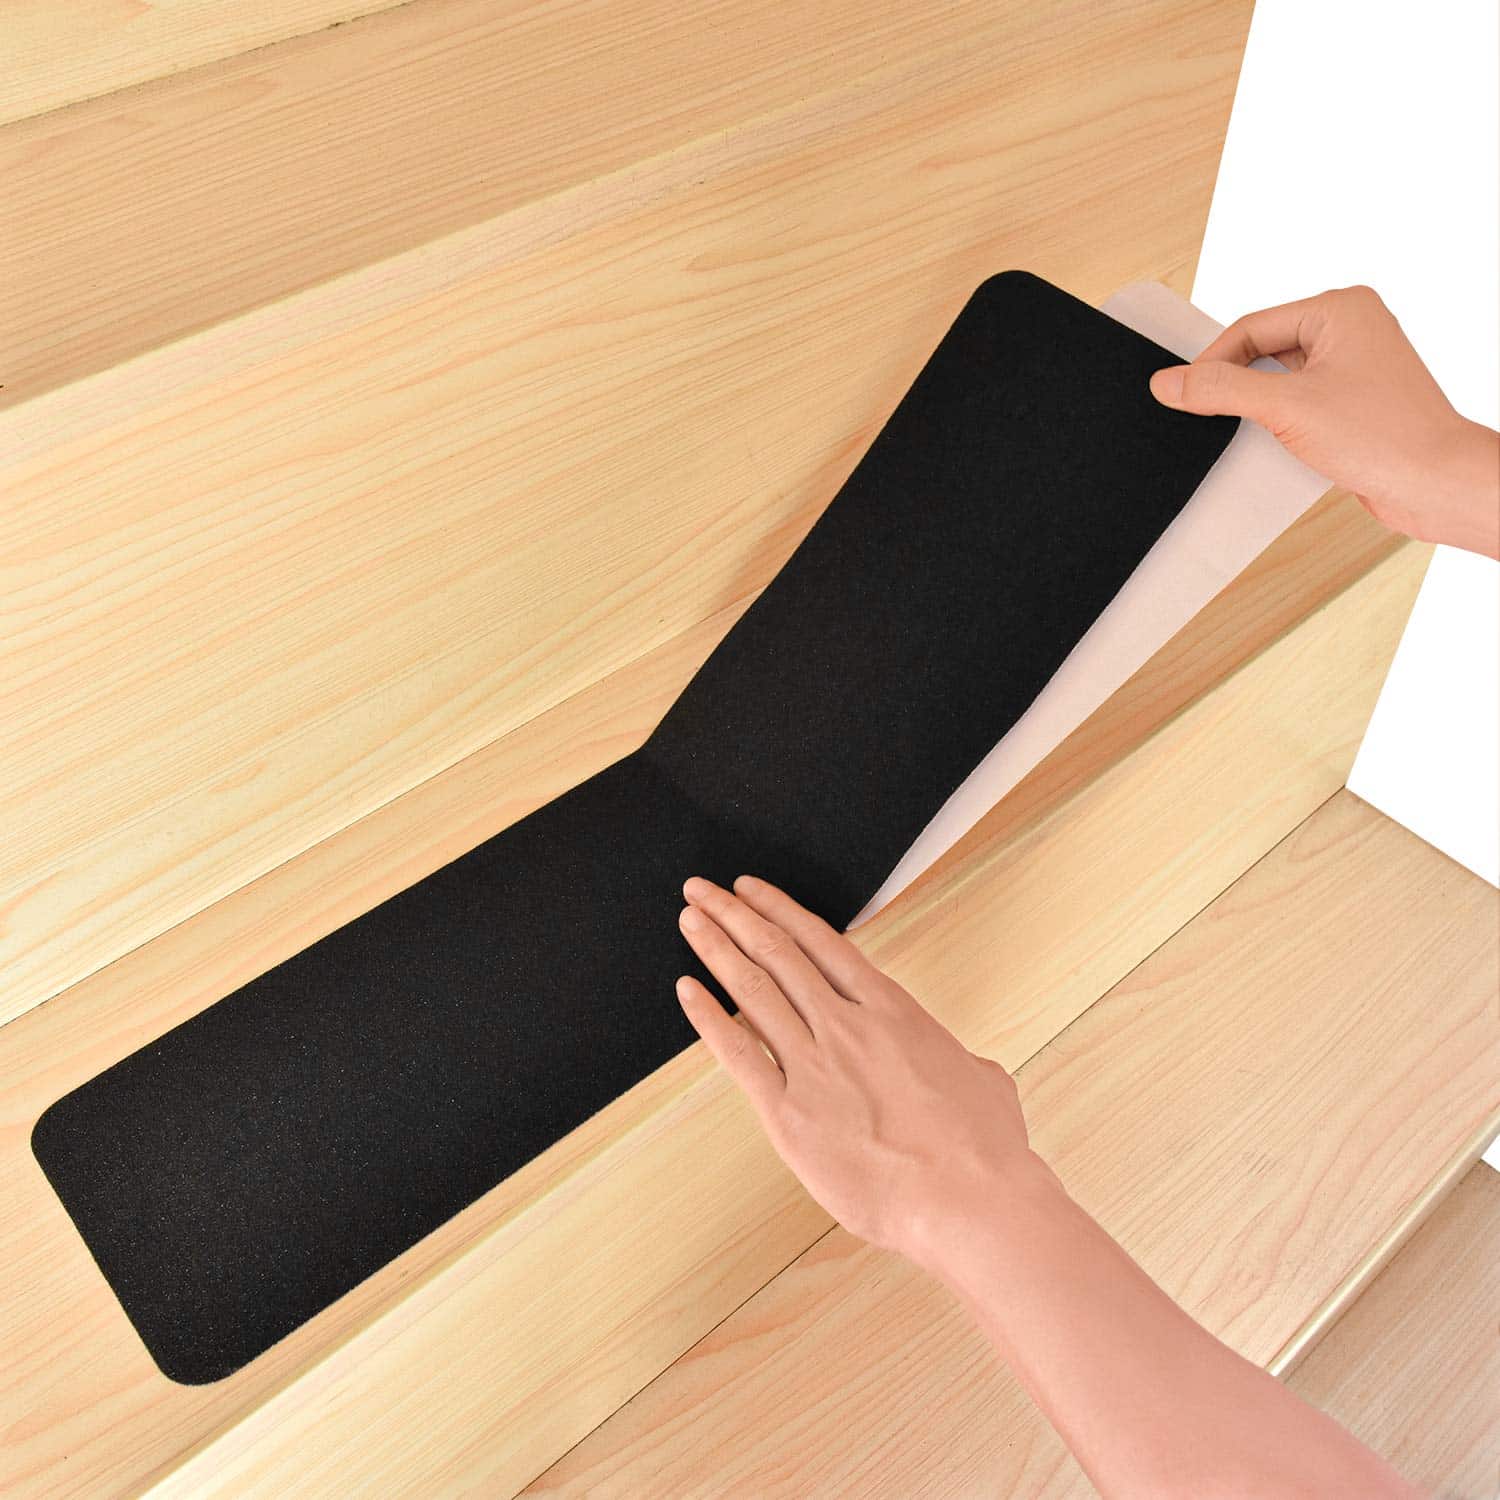 Top 10 Best Non Slip Stair Treads in 2022 Reviews | Buyer's Guide